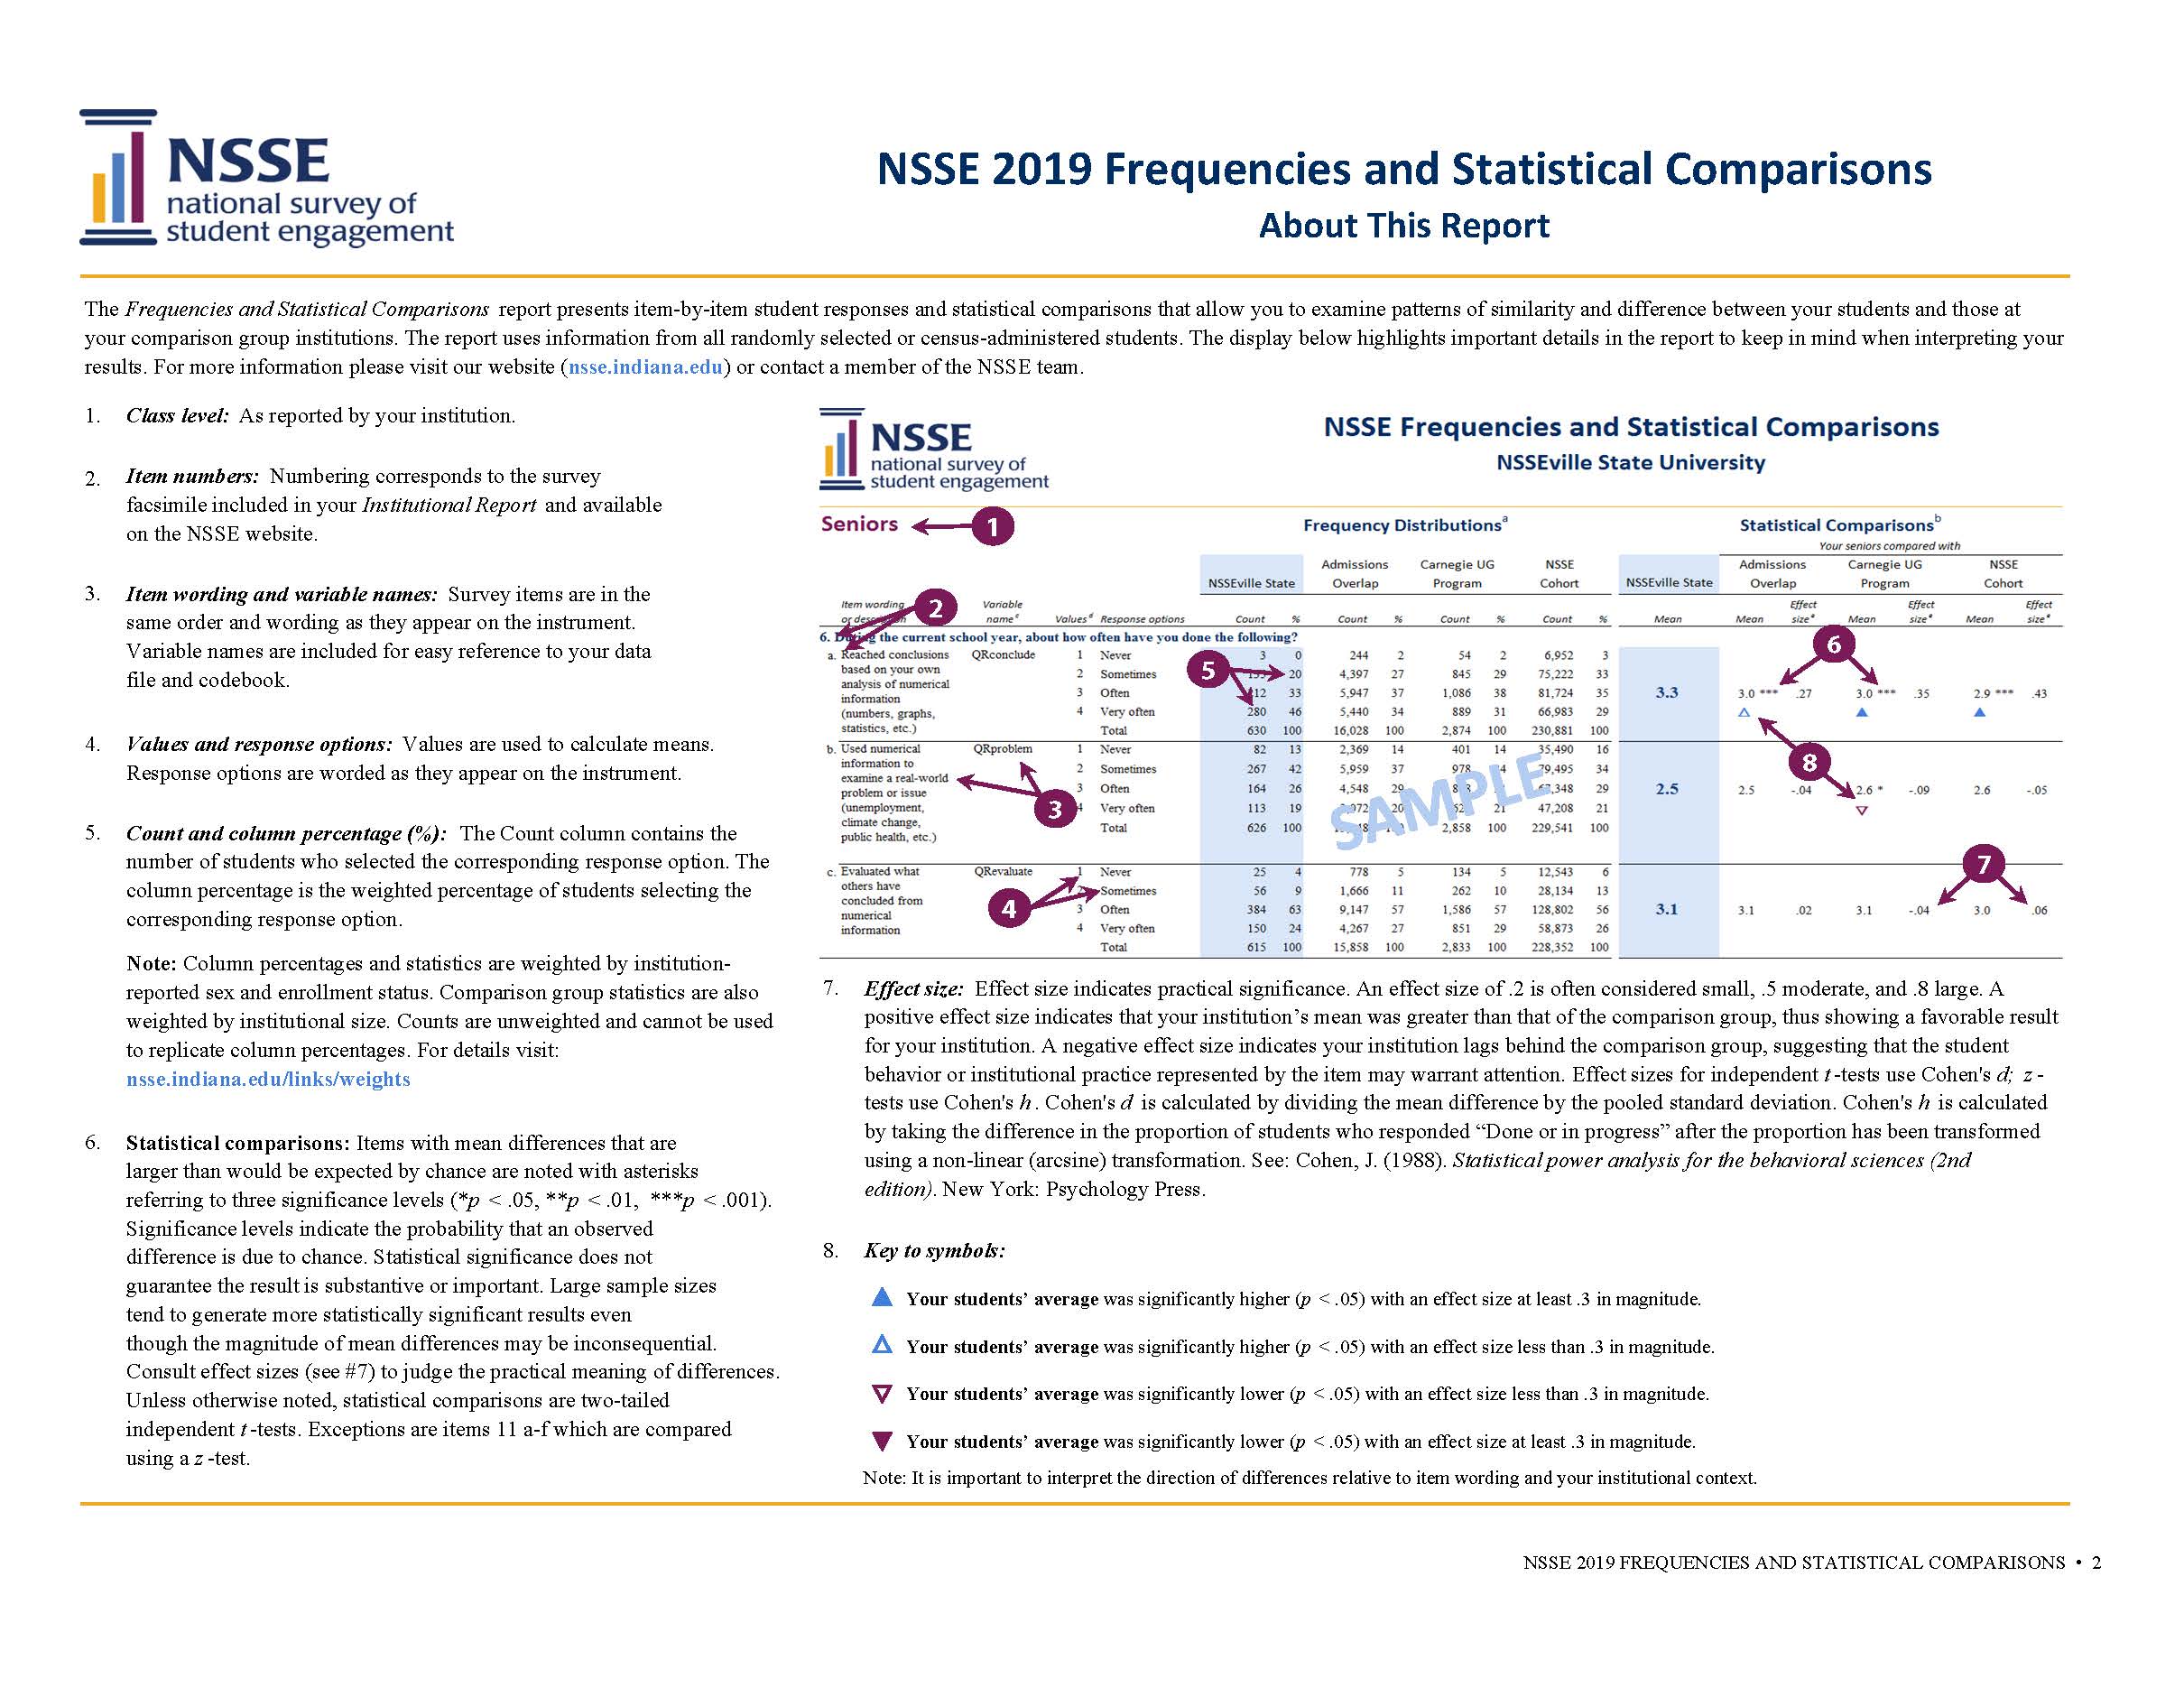 Sample Report: page 2 of NSSE Frequencies and Statistical Comparisons